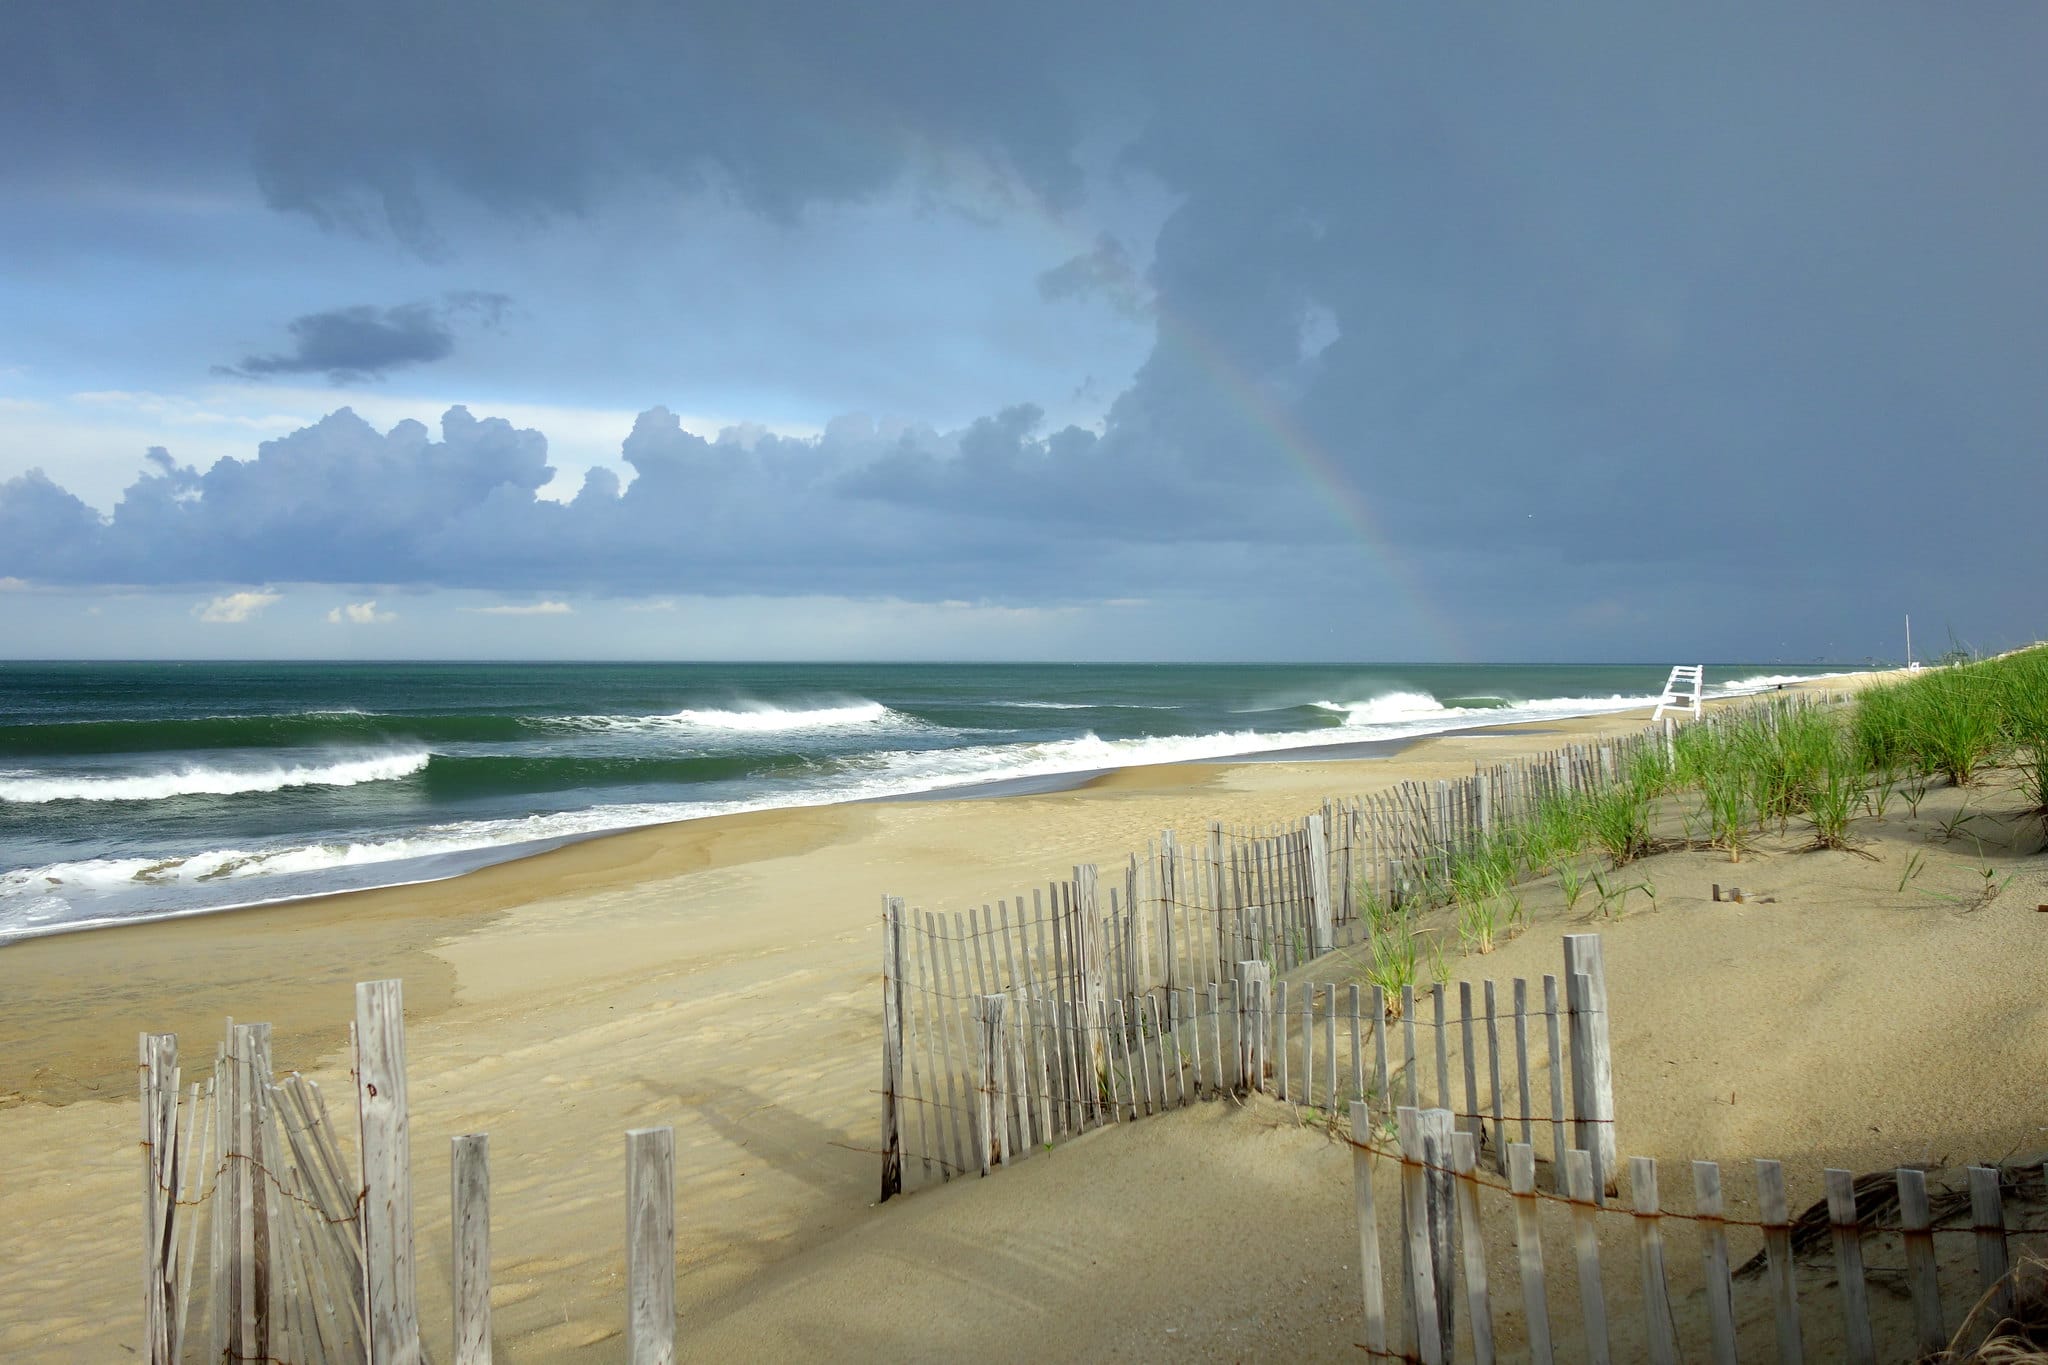 Remnants of a storm and a rainbow over Nags Head Beach in North Carolina